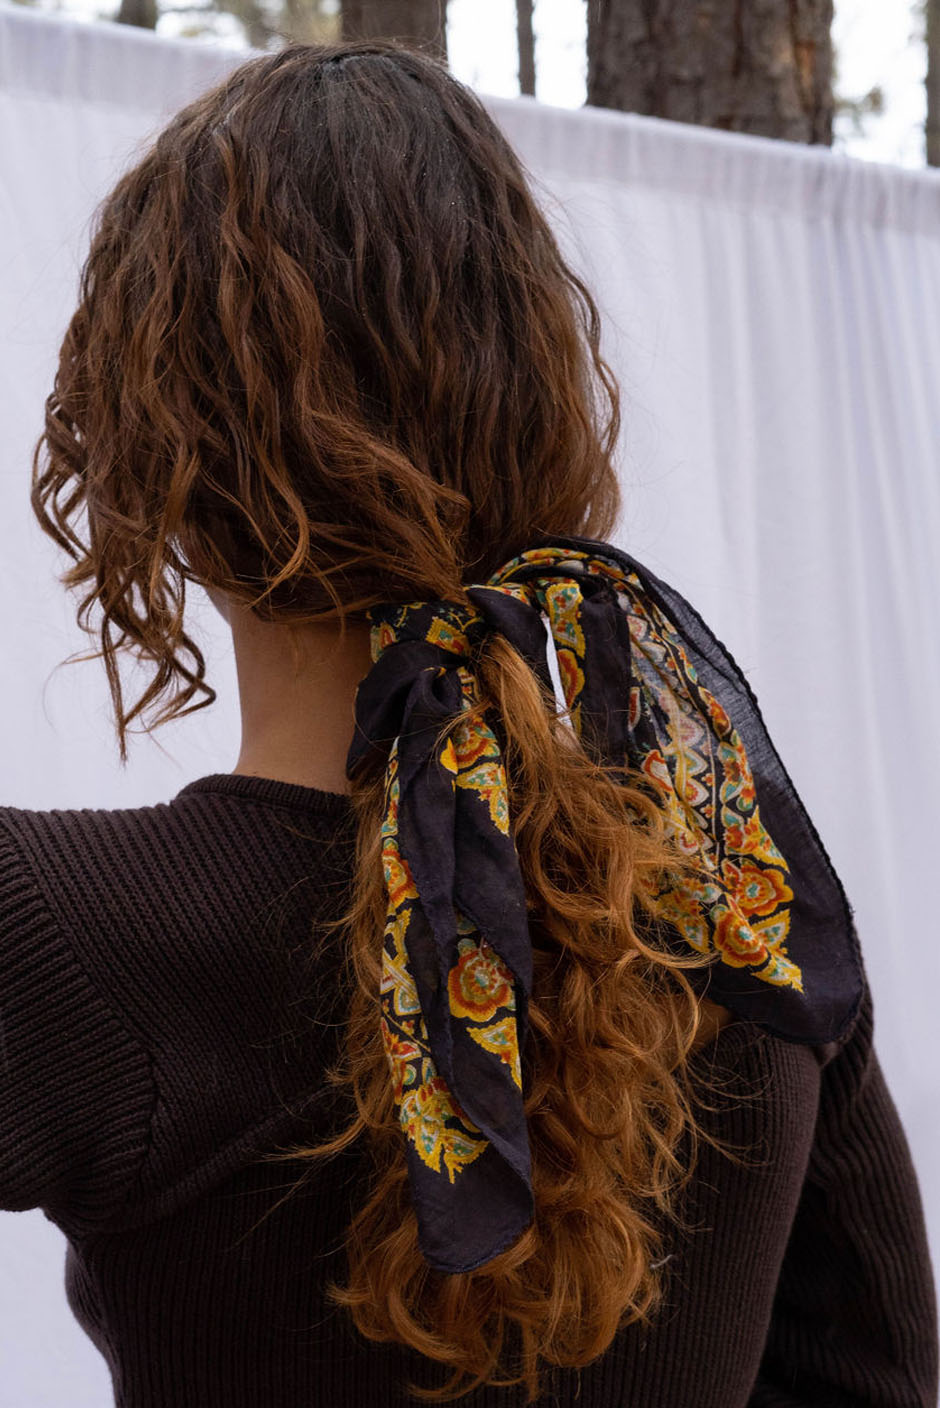 Vintage Freya bandana in Noir handcrafted in India Featuring a multicolor paisley print for women by Panero Clothing. Hair tied view.